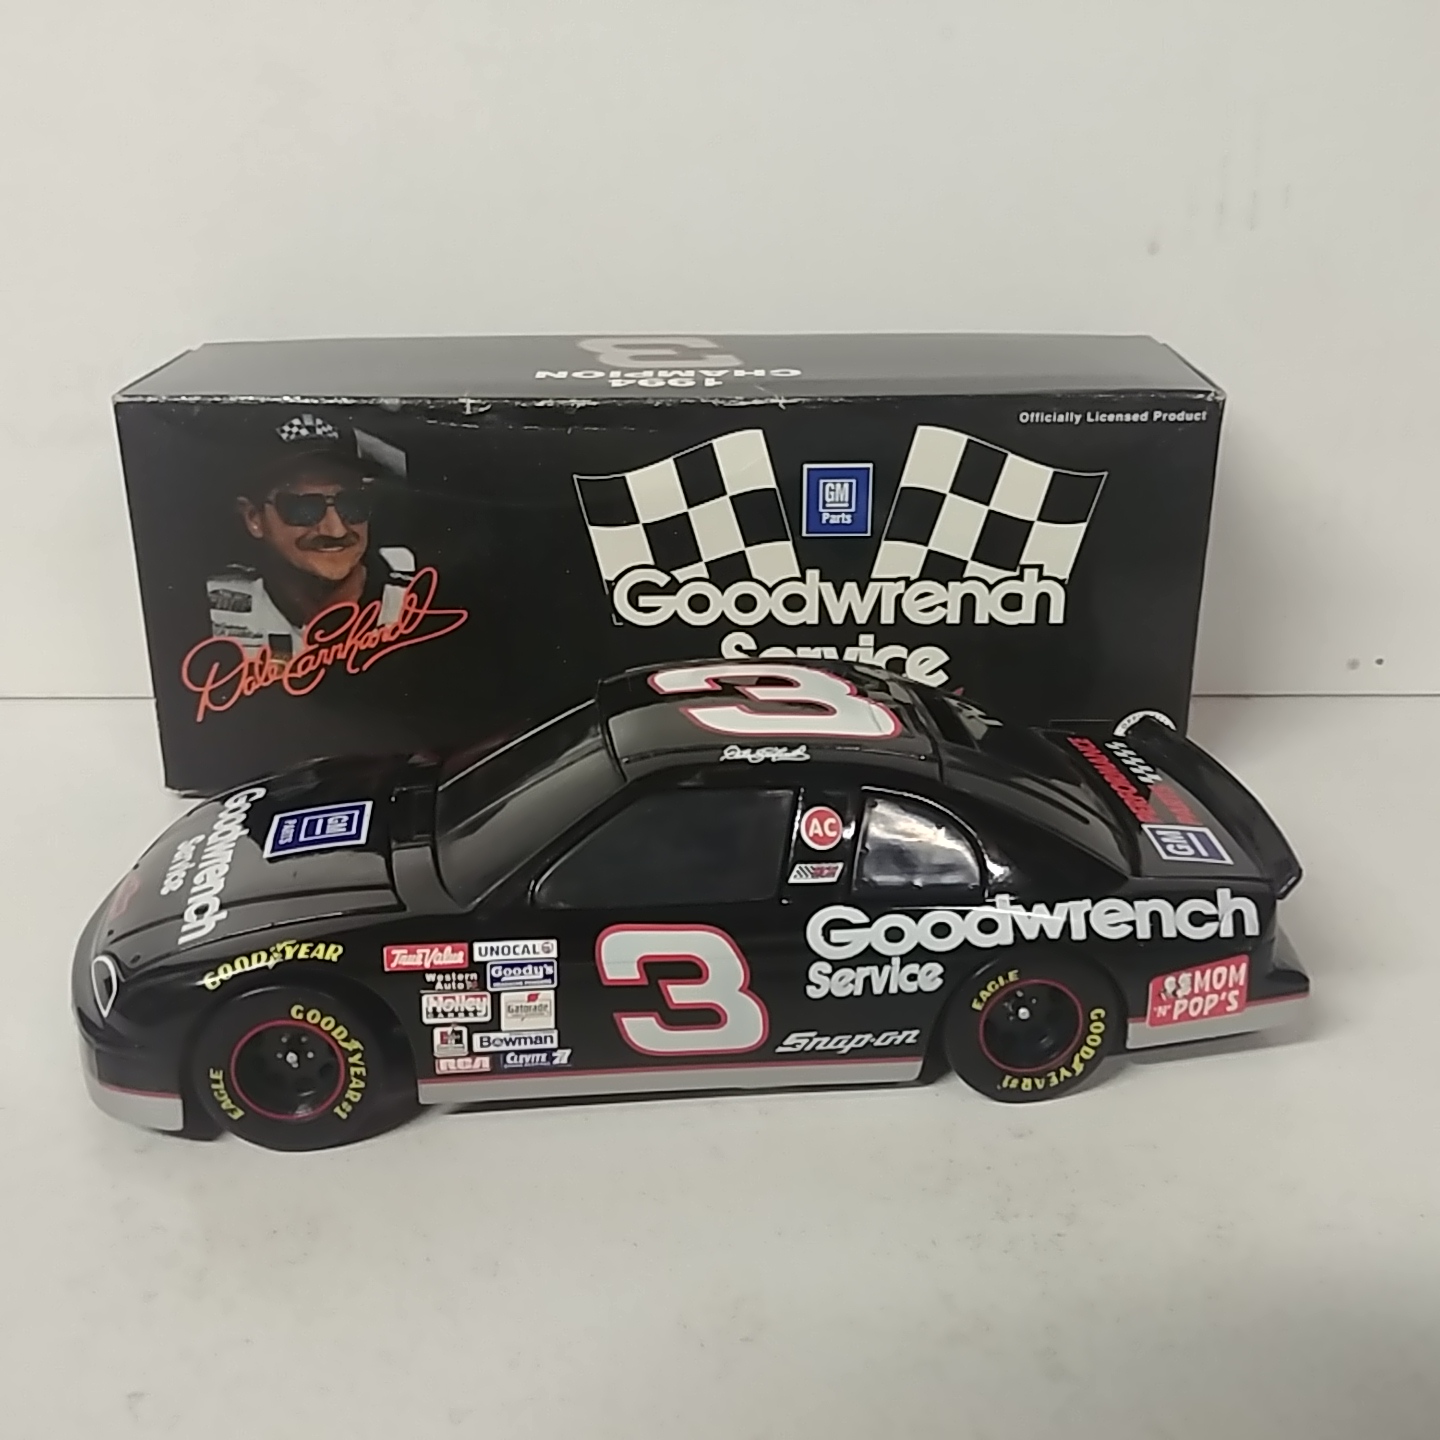 1995 Dale Earnhardt 1/24th Goodwrench "94 Champion""with headlight rings" b/w bank